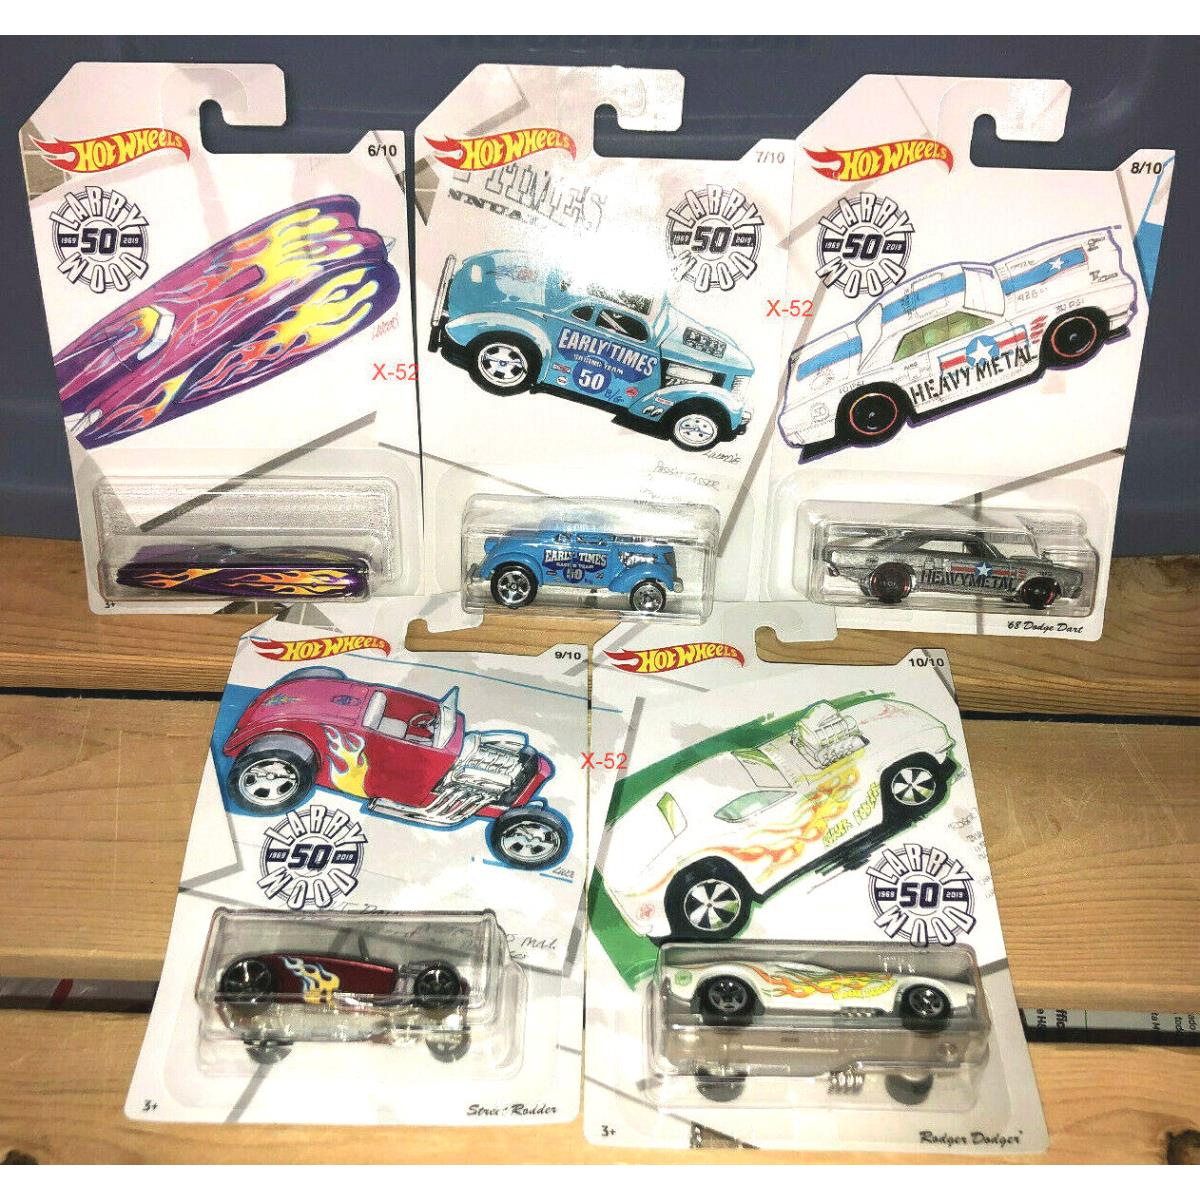 Larry Wood Hot Wheels Complete Set of 10 1:64 Cars 50th Anniversary 2019